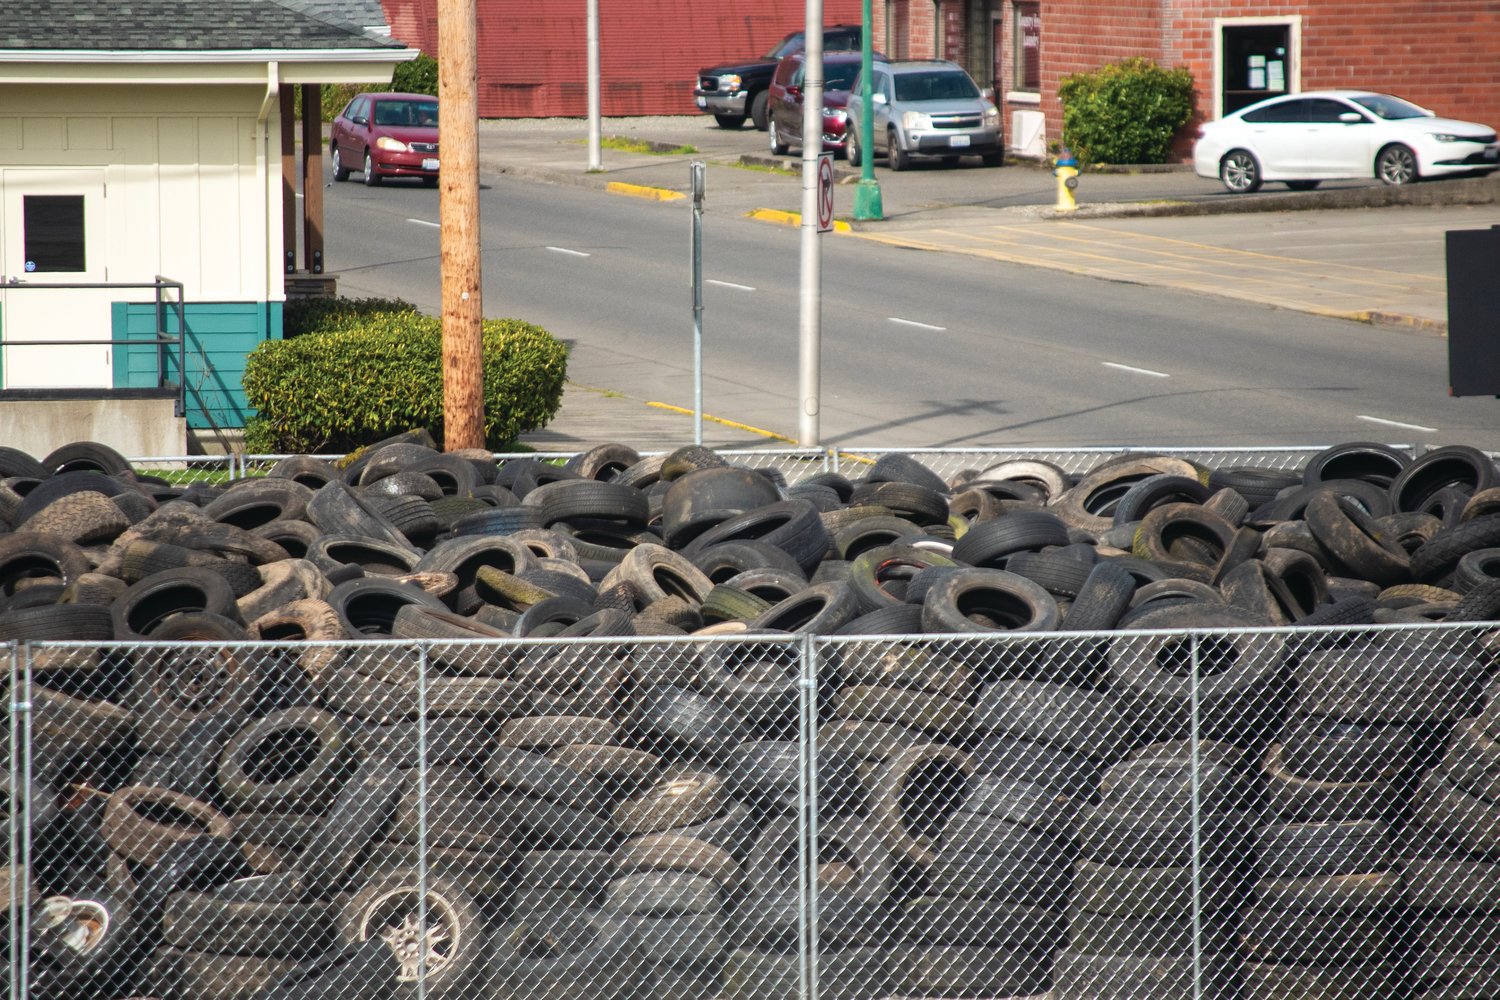 Tires sit in Centralia waiting to be hauled away after a Lewis County Solid Waste Utility district “Tire Amnesty” event earlier this year.